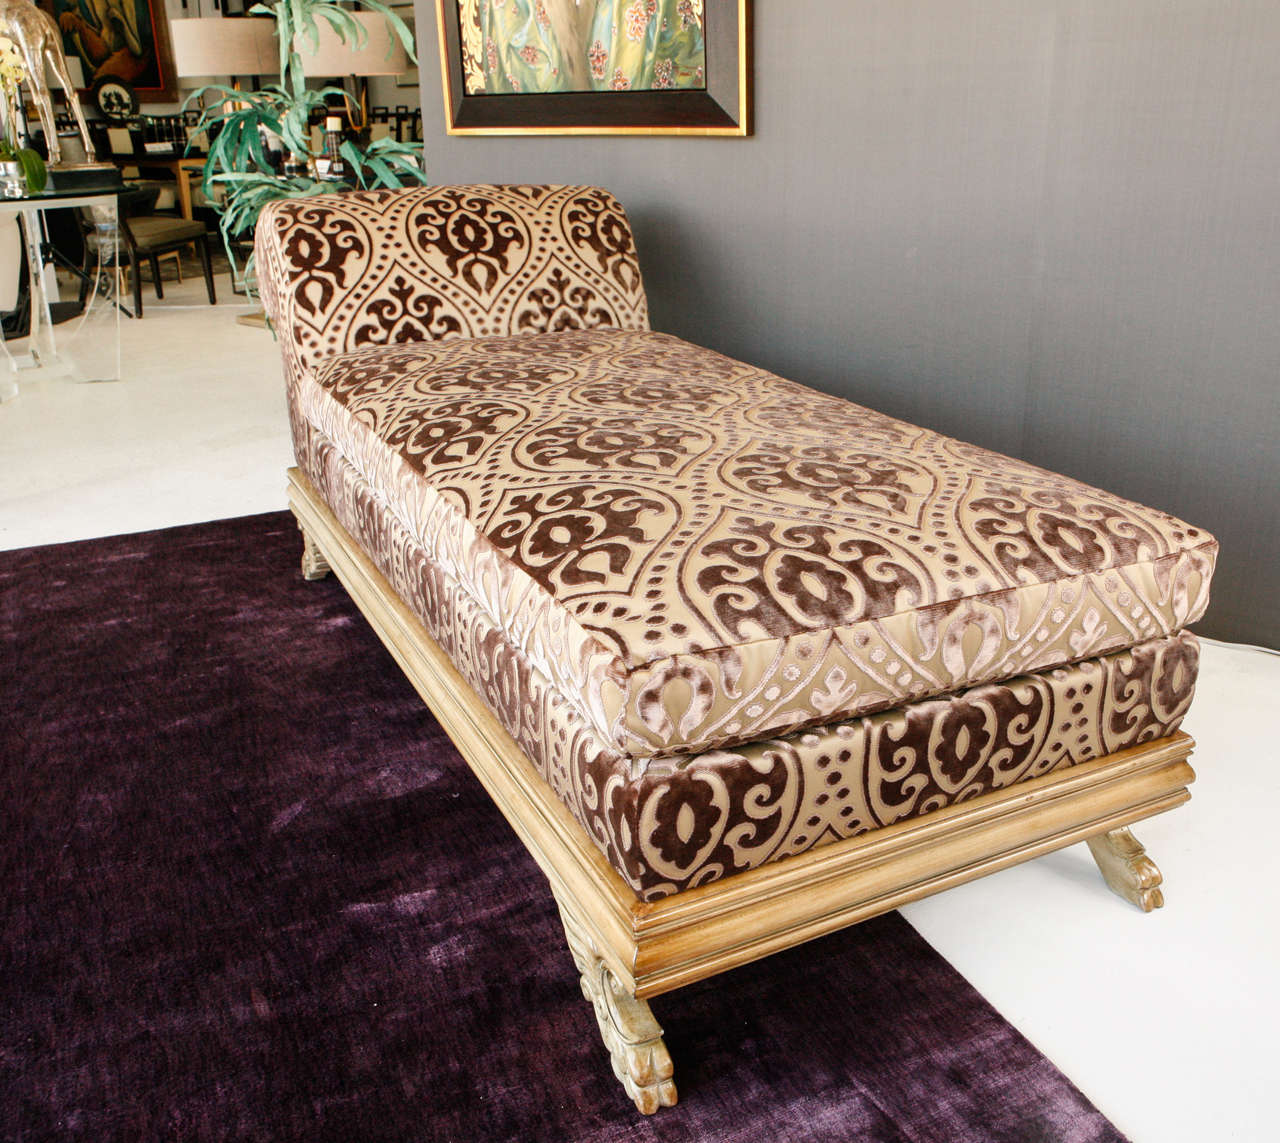 A luxurious Regency chaise longue upholstered in a dusty plum cut silk velvet.  This chaise retains its original antiqued painted finish. The base is detailed with scroll details and winged pad feet.